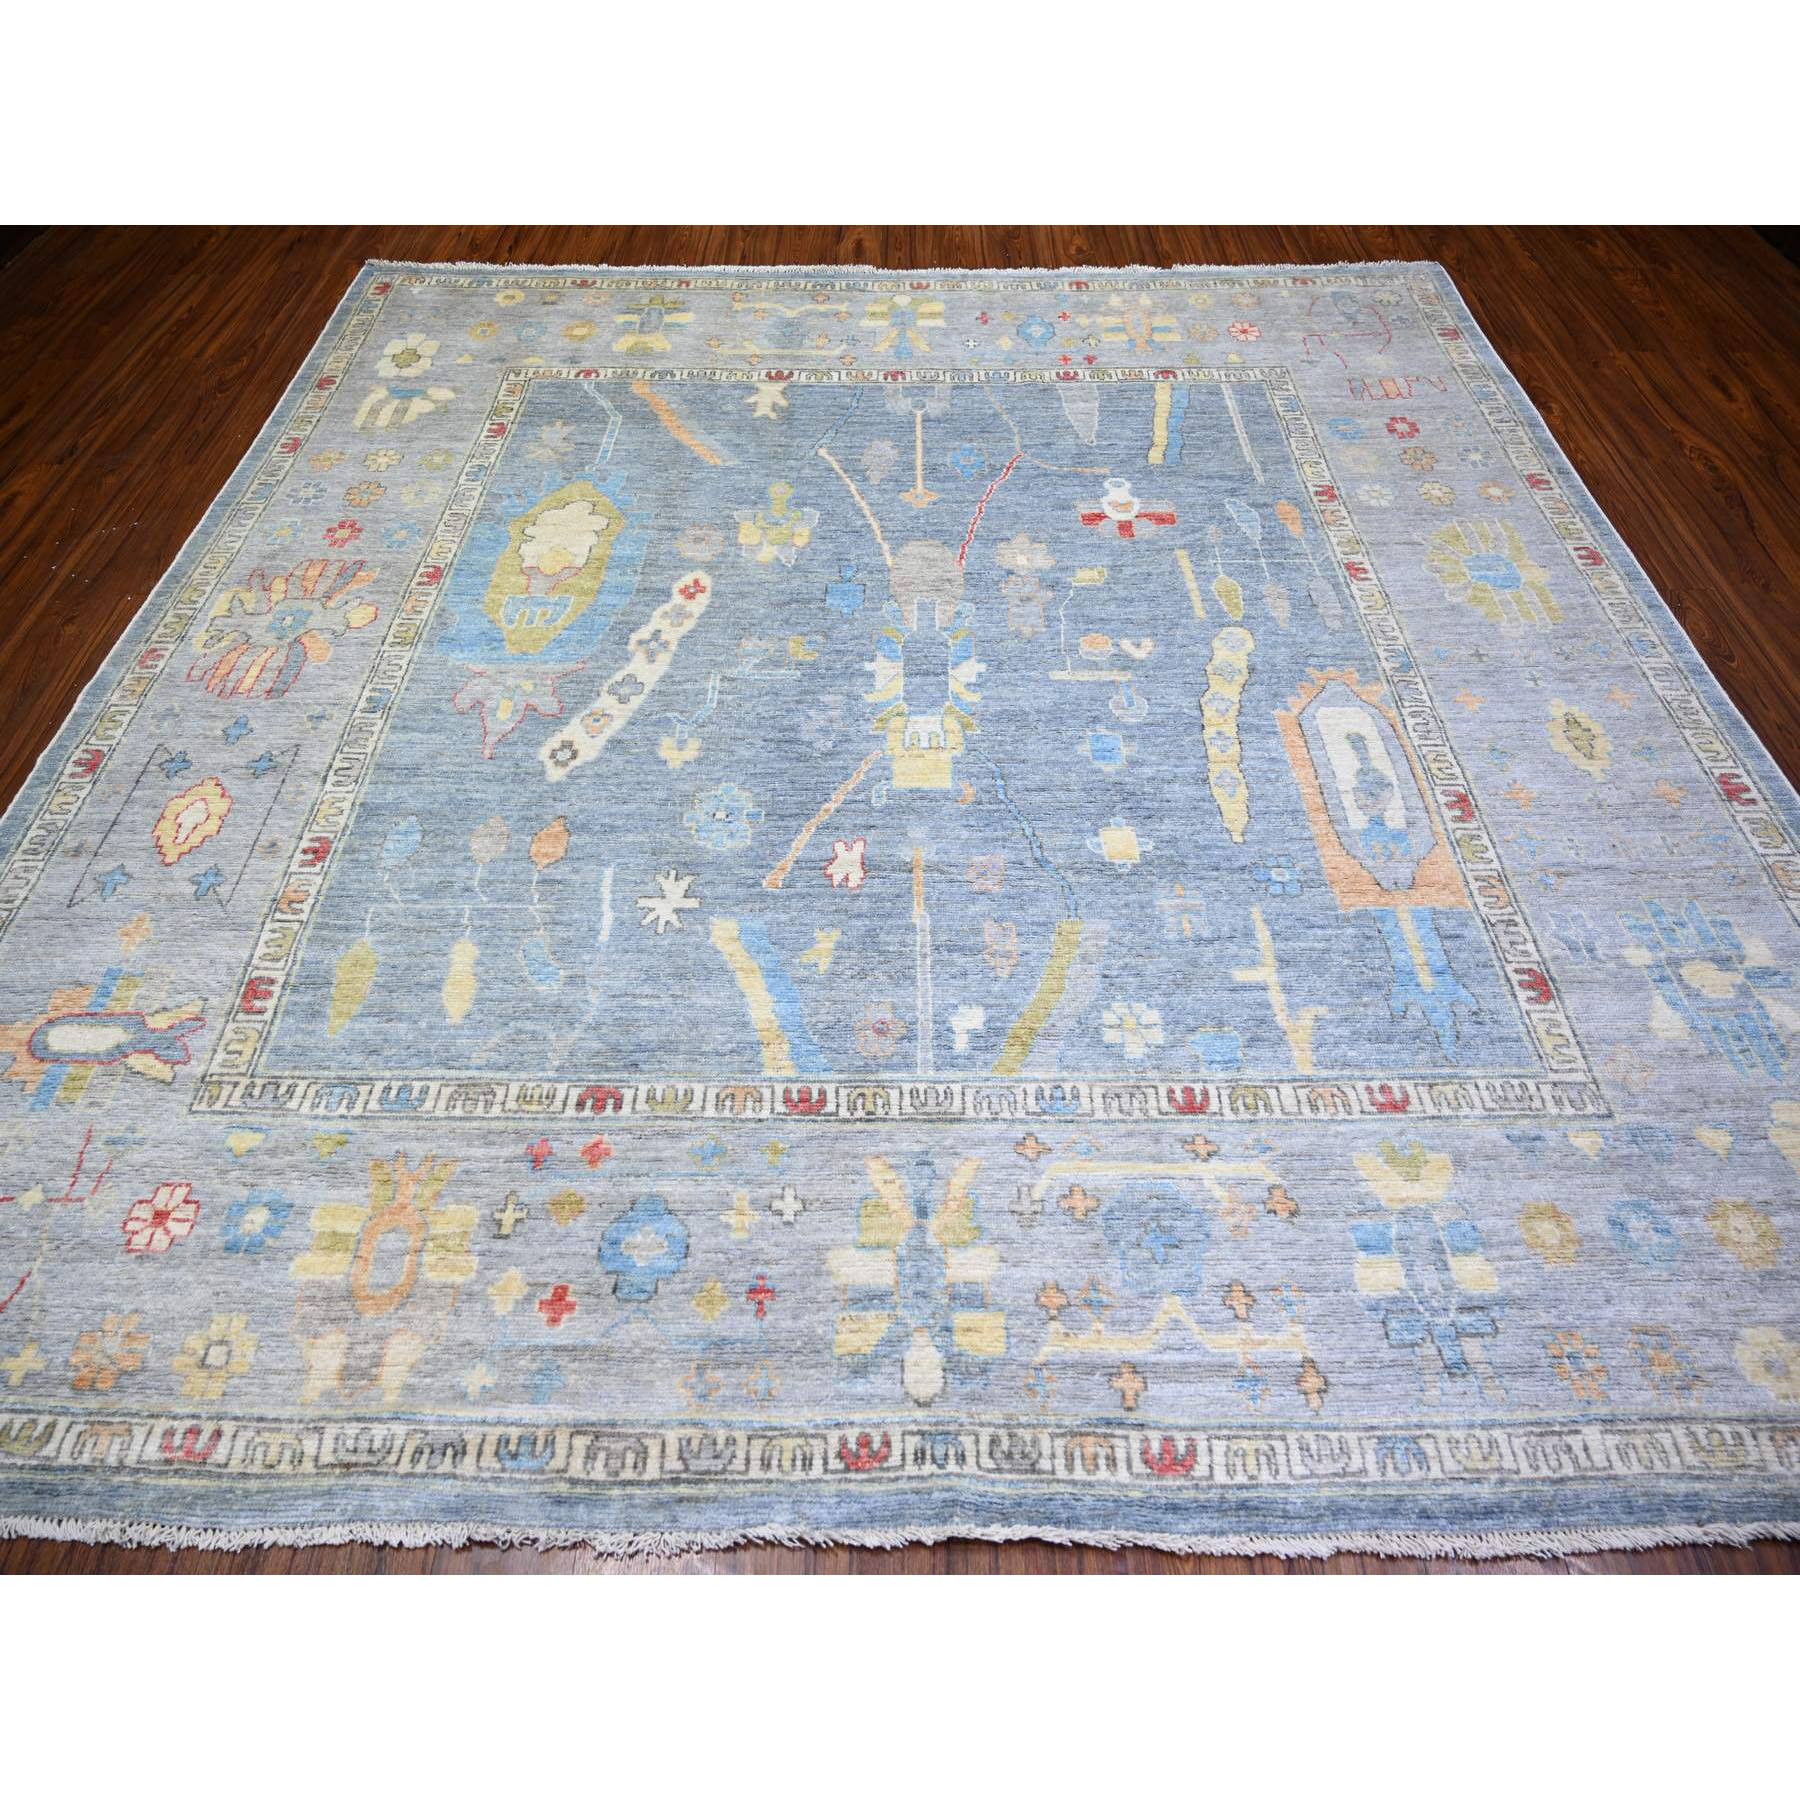 9'10"x9'10" Periwinkle Blue, Hand Woven Afghan Angora Oushak with Soft Colors, Natural Dyes Natural Wool, Square Oriental Rug 